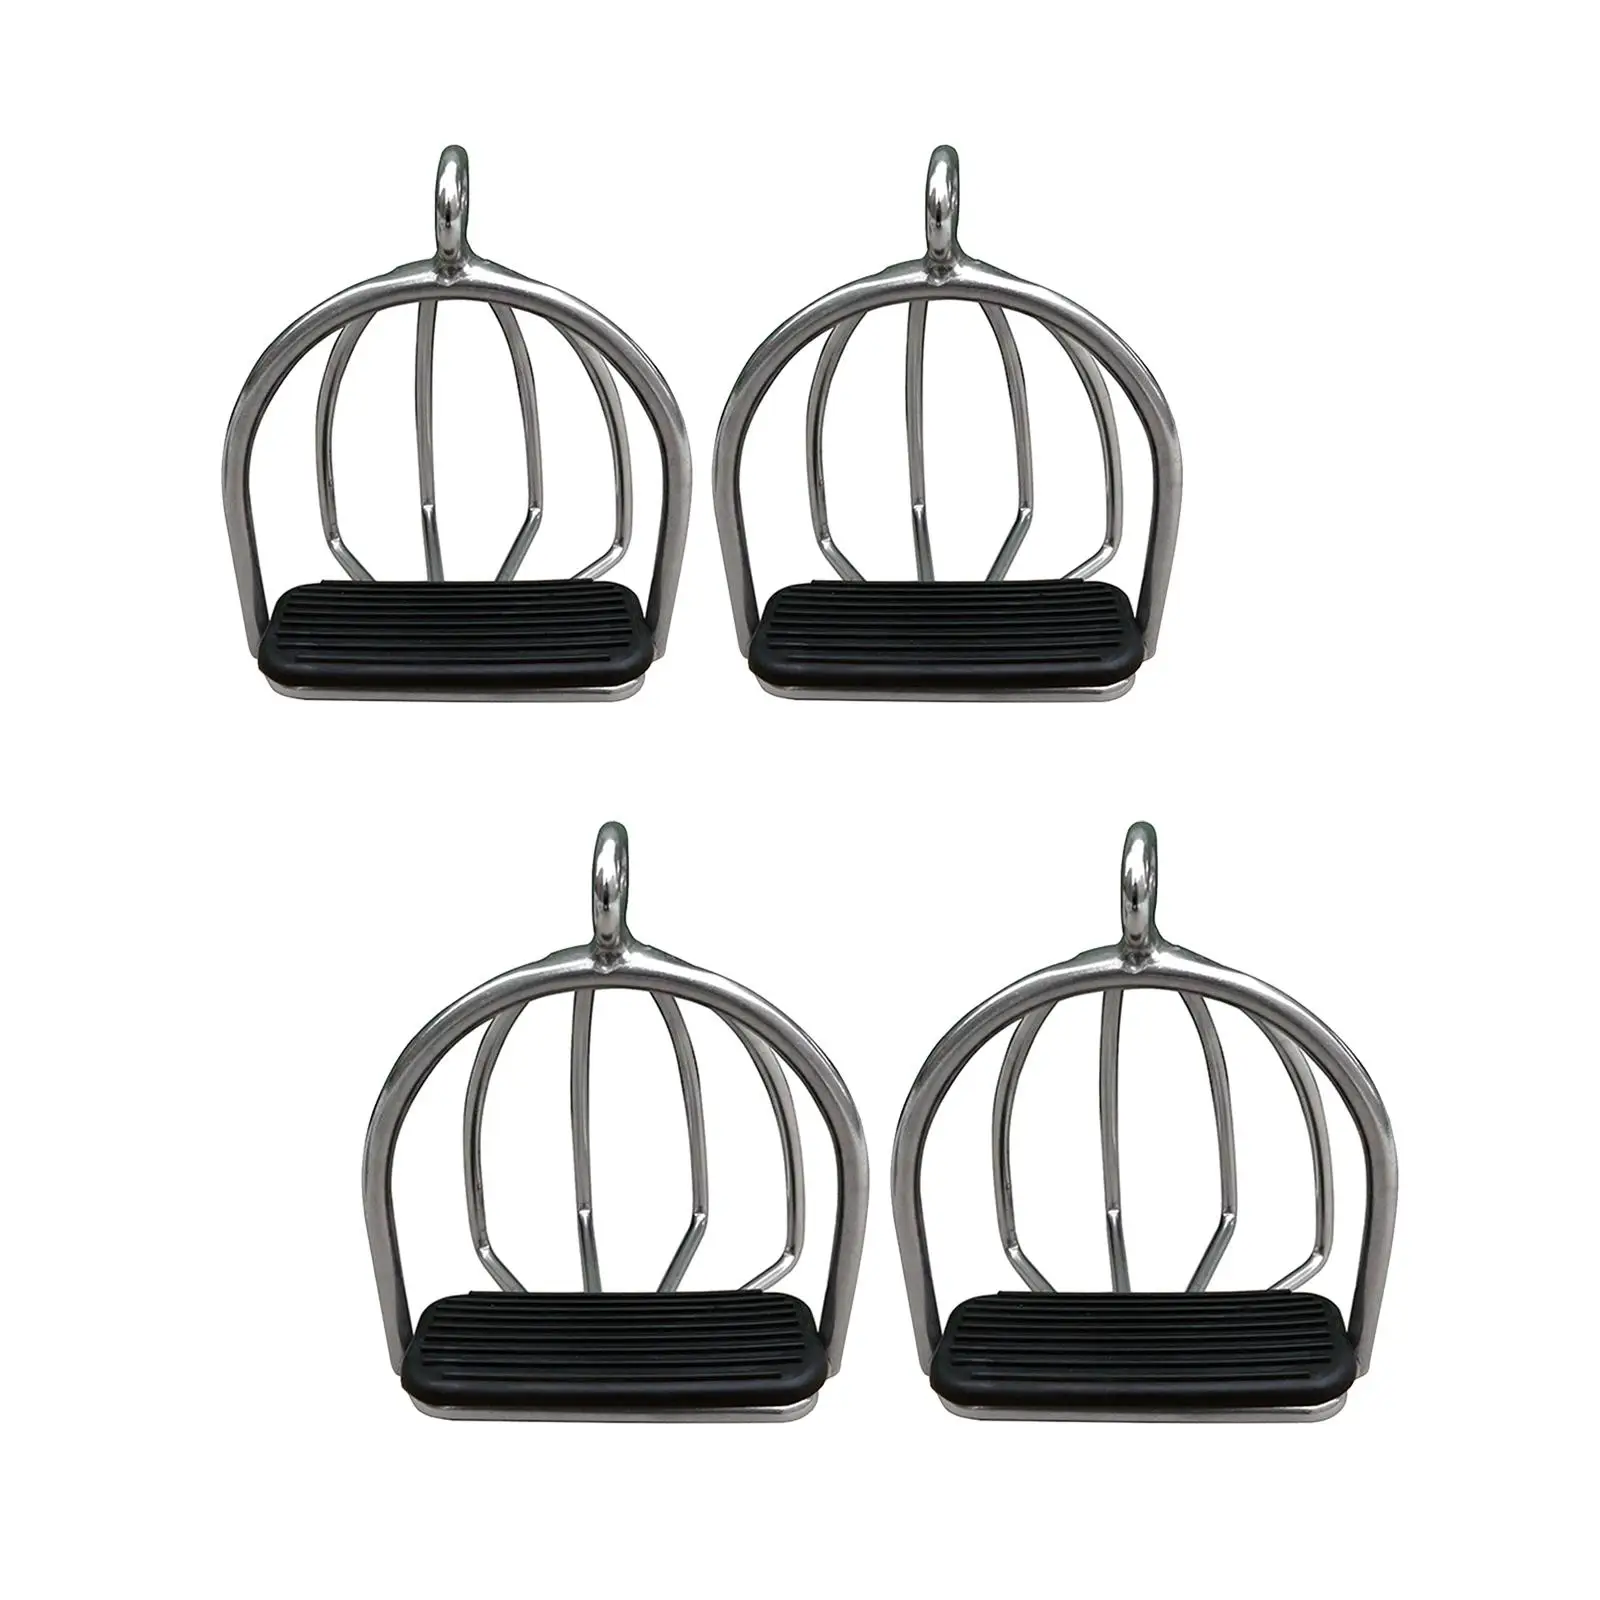 2Pcs Cage Horse Riding Stirrups Rubber Pad Non Slip for Horse Riding Kids Equipment